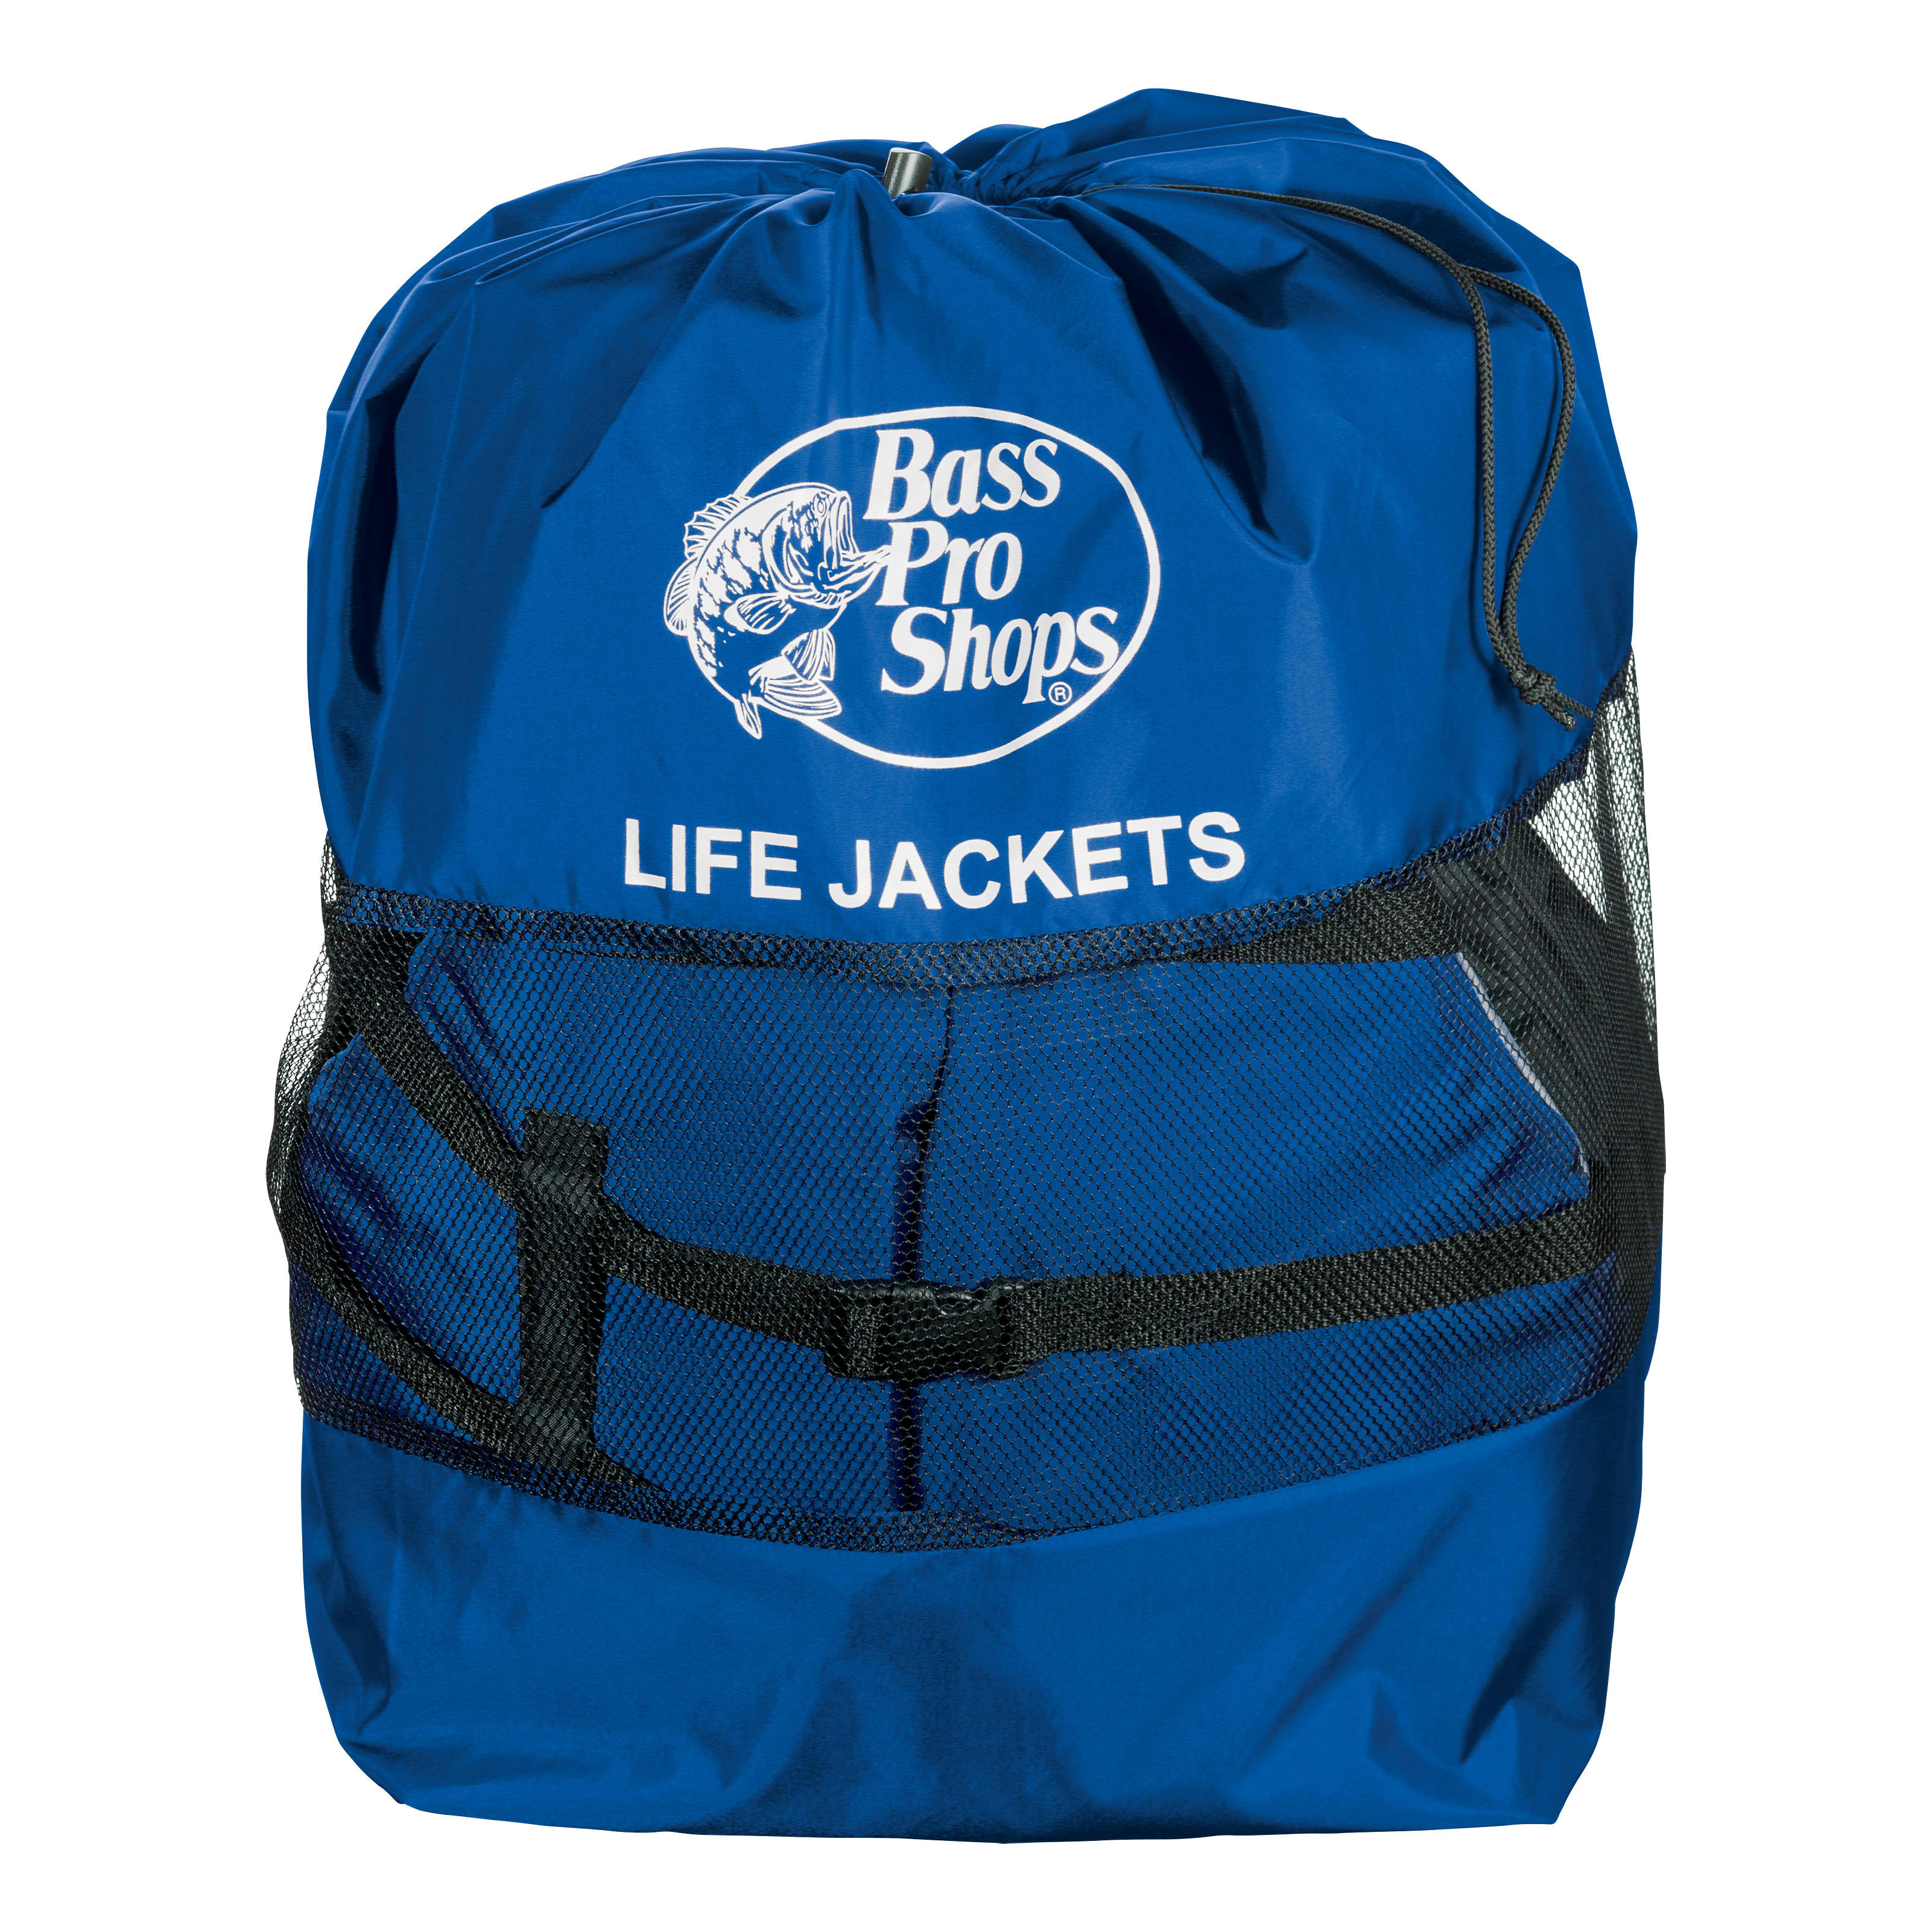 Bass Pro Shops® Adult Universal Life Vest - 4-Pack - Carrying Bag View